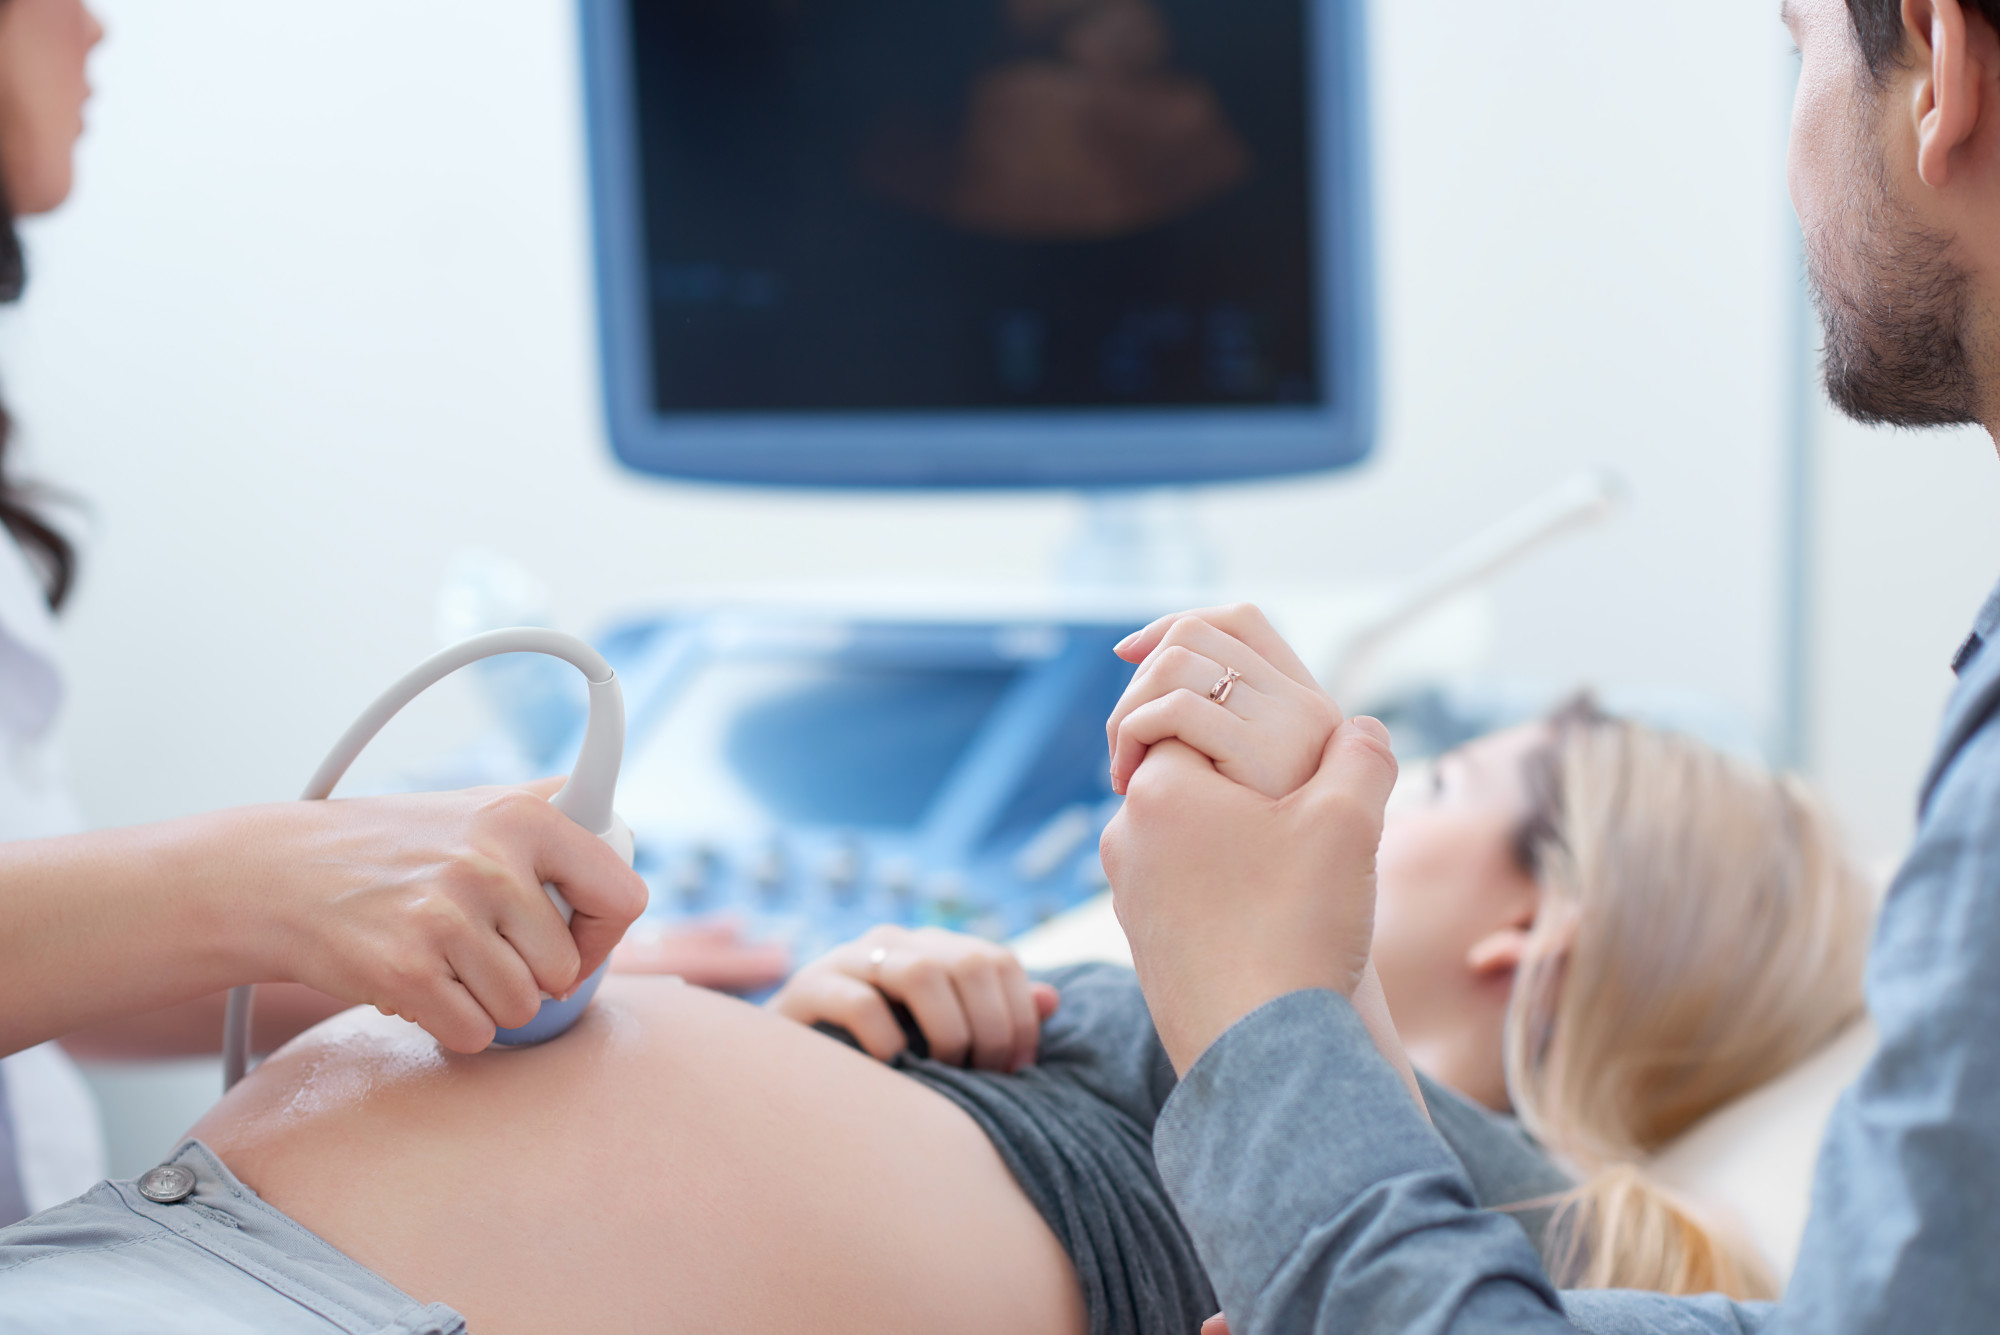 What’s the Difference Between a 3D and a 4D Ultrasound?